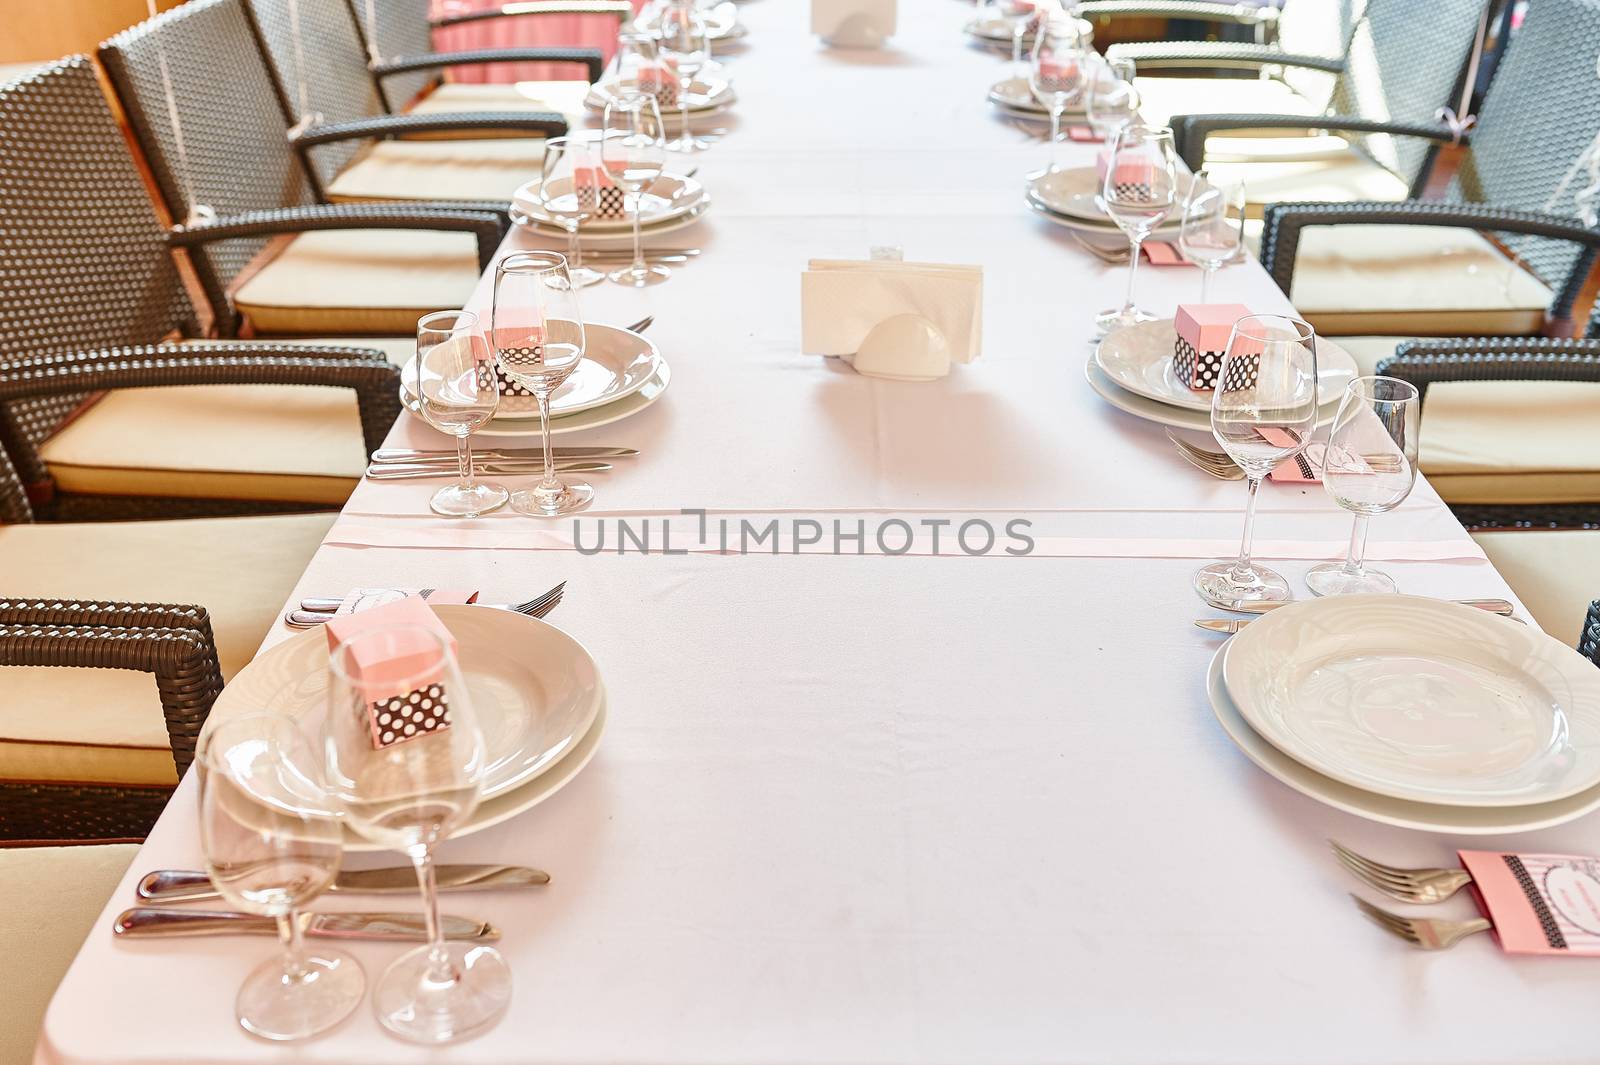 Serving table for a wedding banquet in a restaurant.